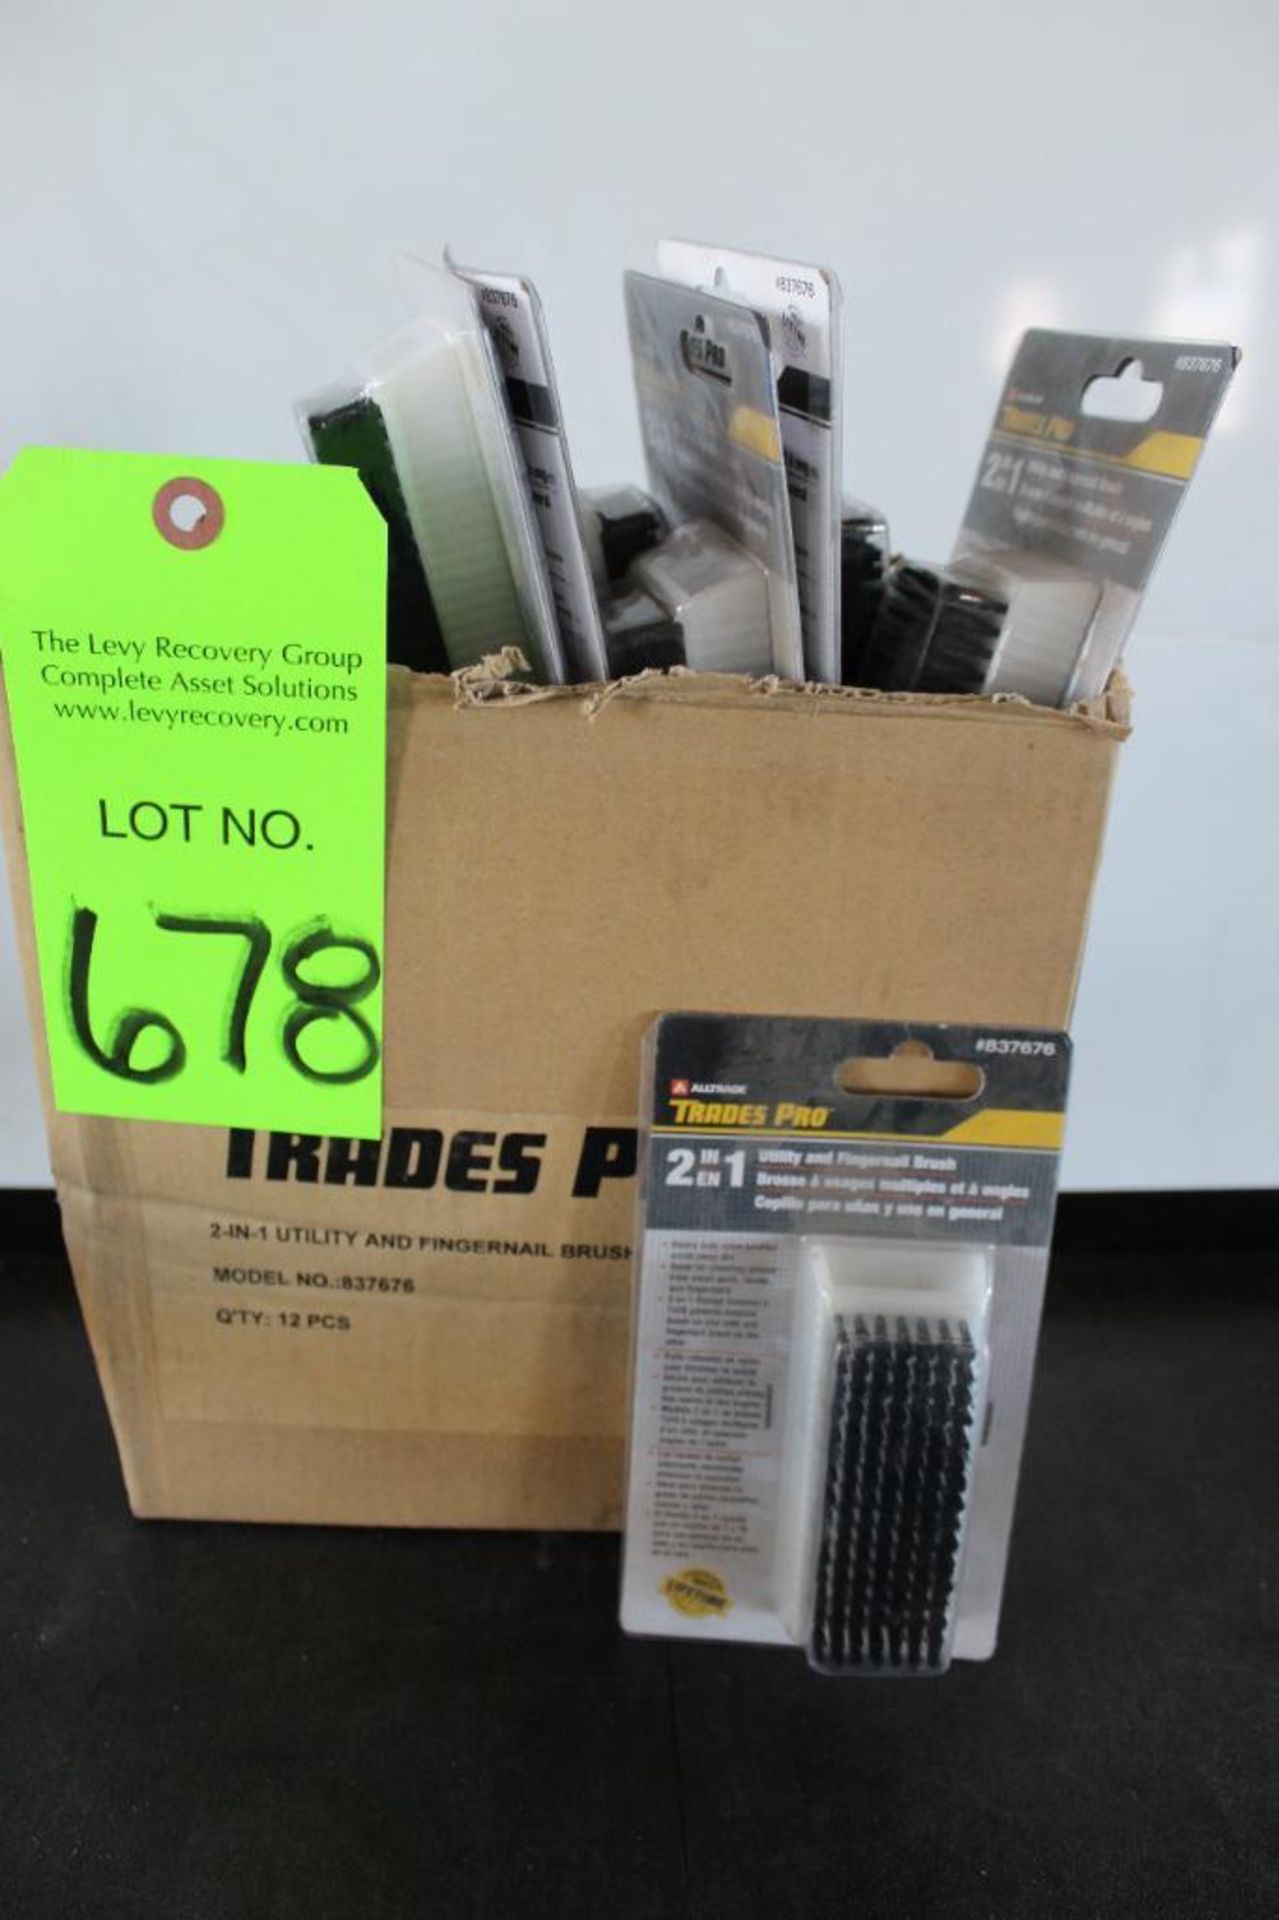 Box of (15) Trades Pro 2-In-1 Utility and Fingernail Brush Model No. 837676 - Image 2 of 3